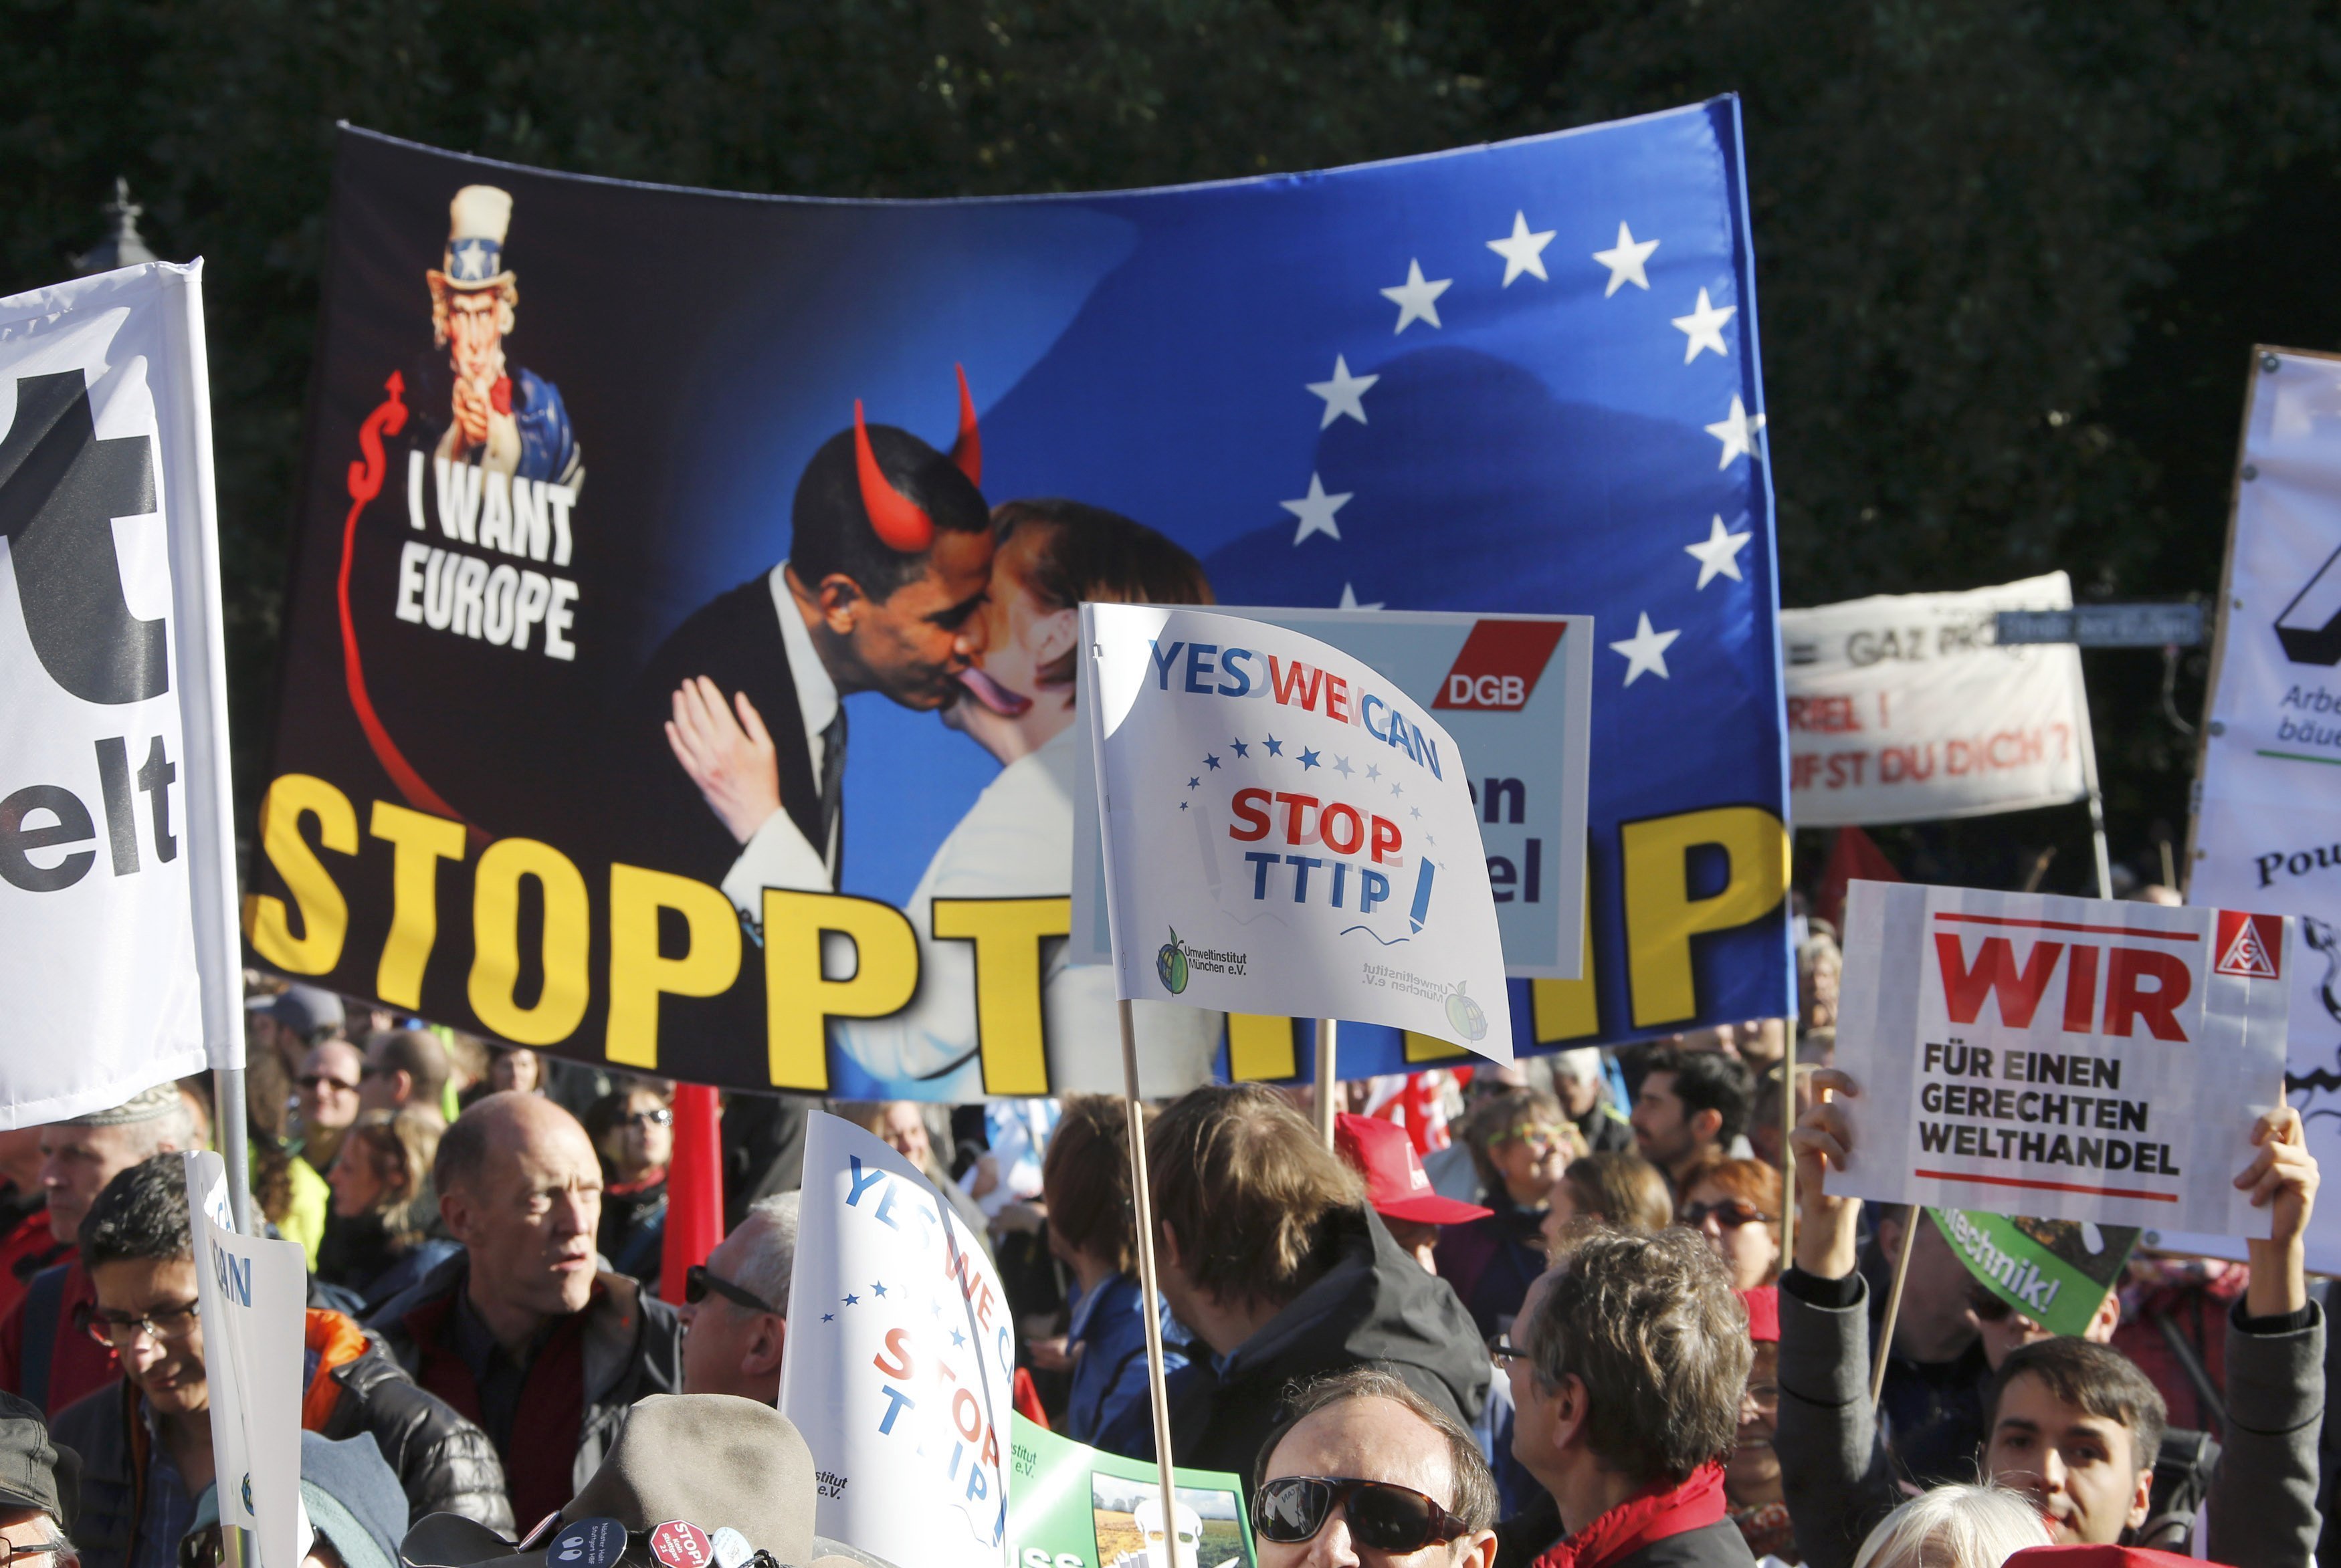 Consumer rights activists take part in a march to protest against the Transatlantic Trade and Investment Partnership (TTIP), mass husbandry and genetic engineering, in Berlin, Germany, October 10, 2015